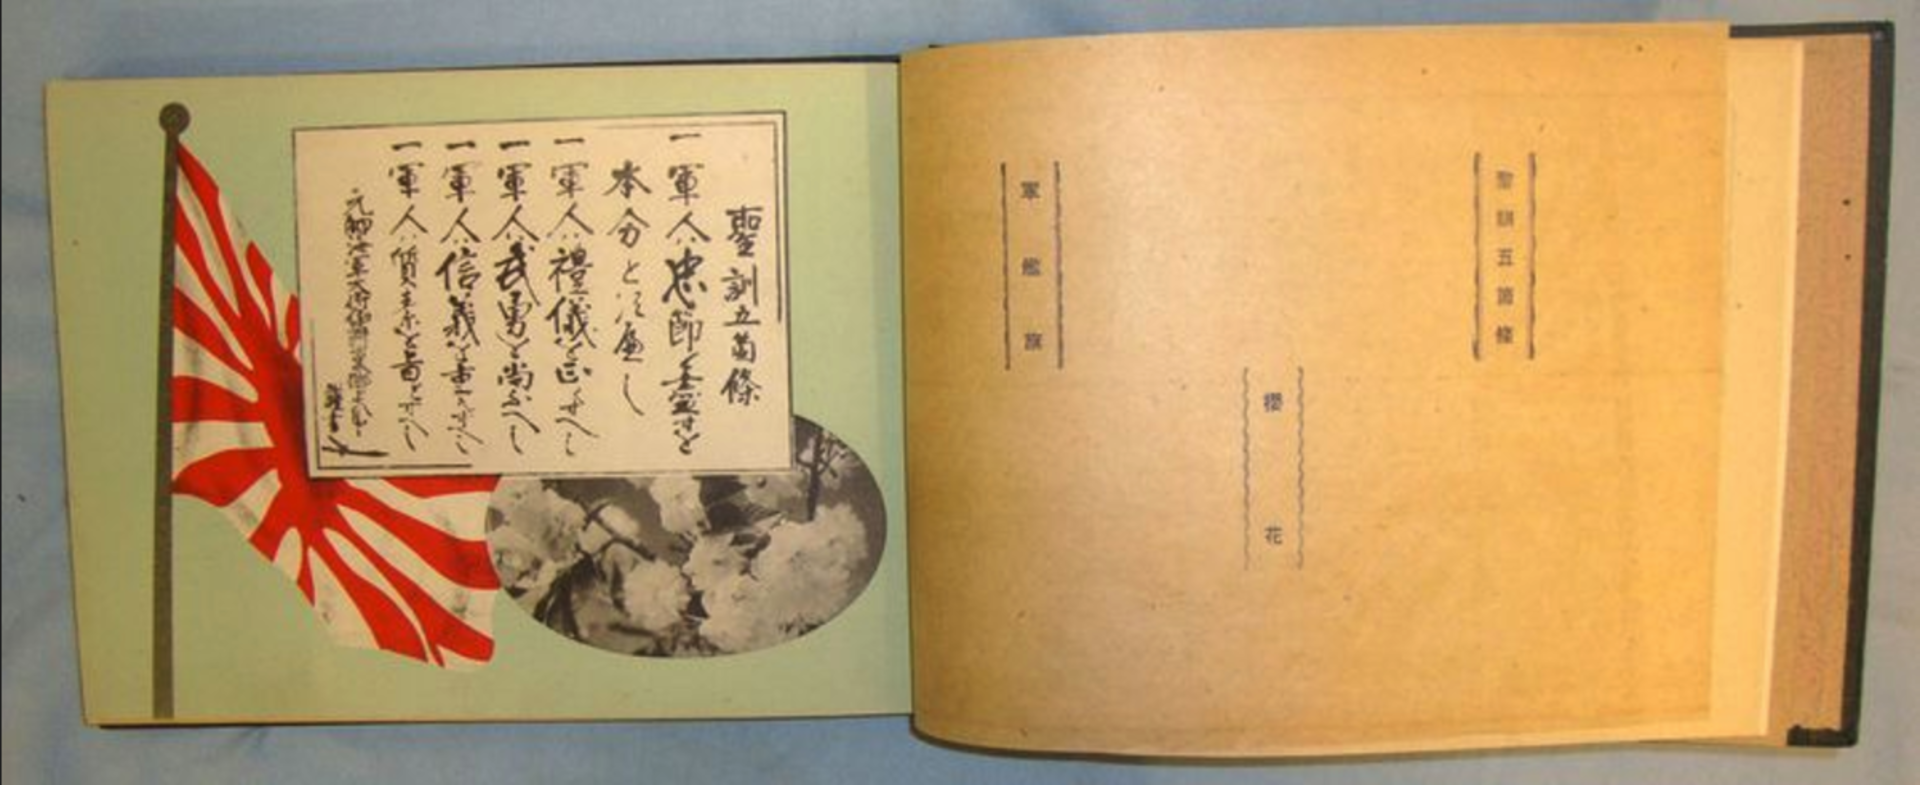 WW2 Official Japanese Naval Officers Acadamy Photograph Album With Original Photographs - Image 2 of 3